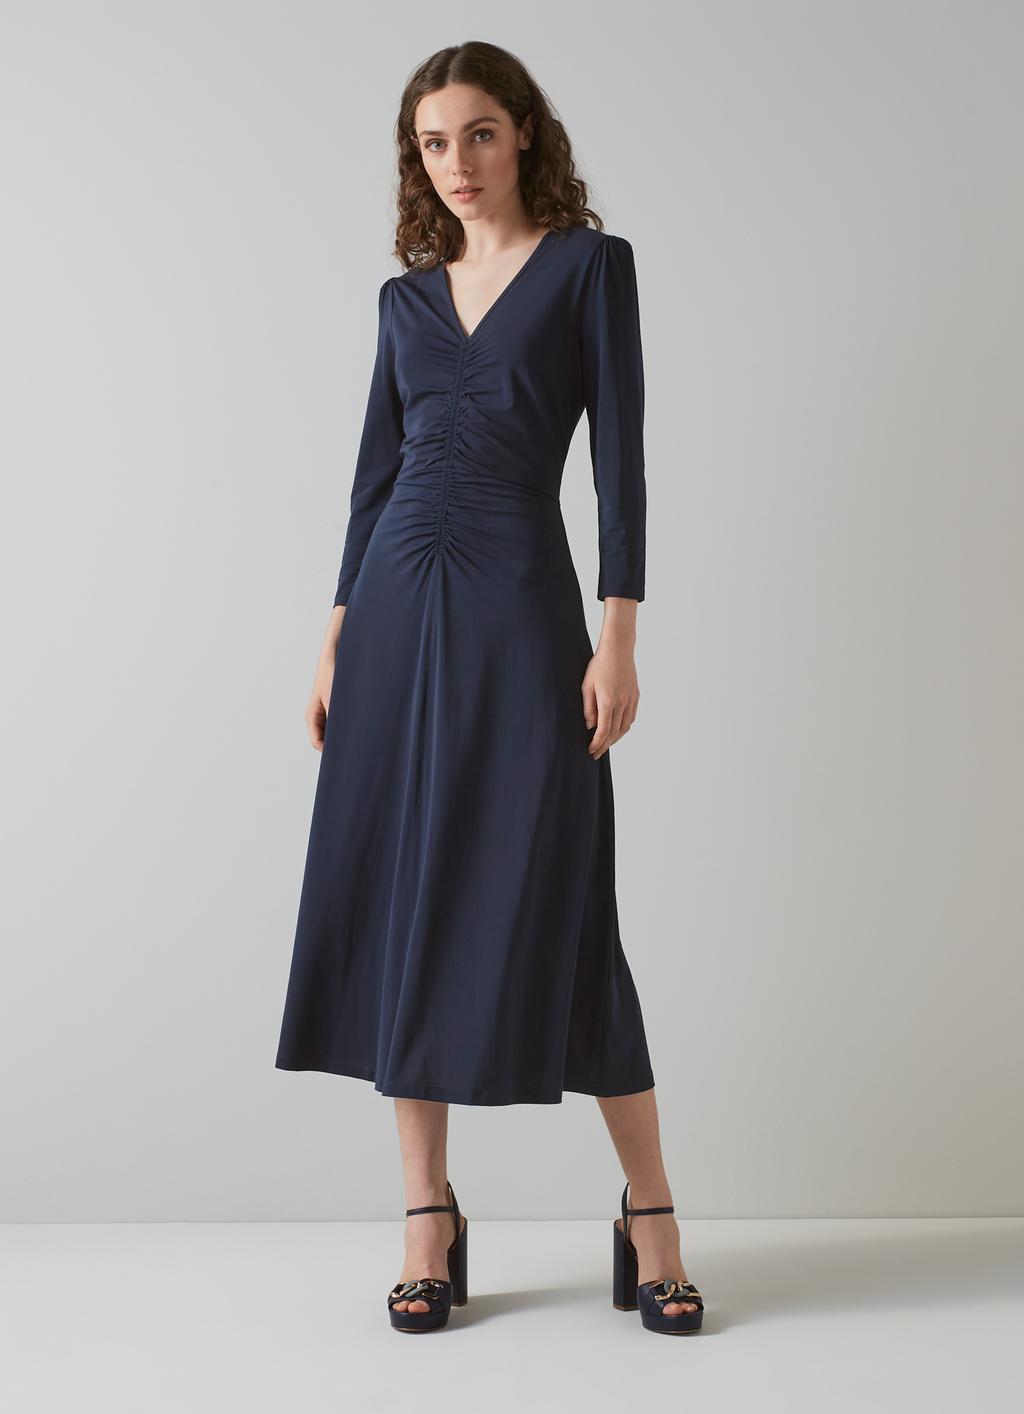 Lottie Navy Blue Ruched Front Midi Dress